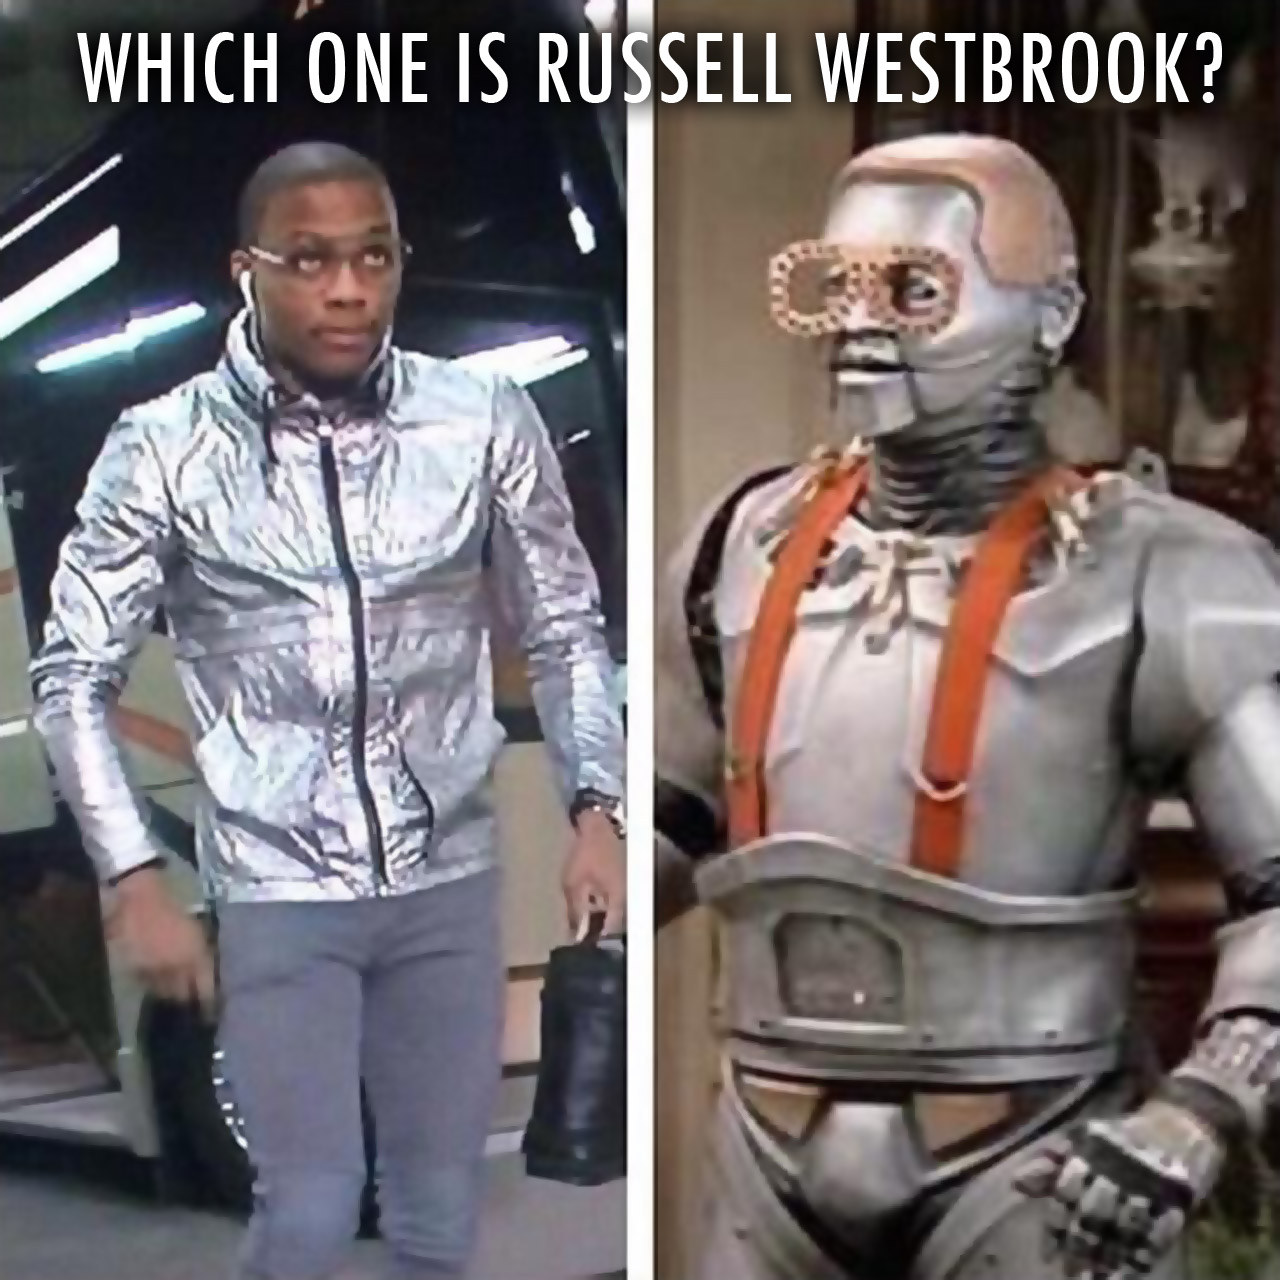 Which one is Russell Westbrook?